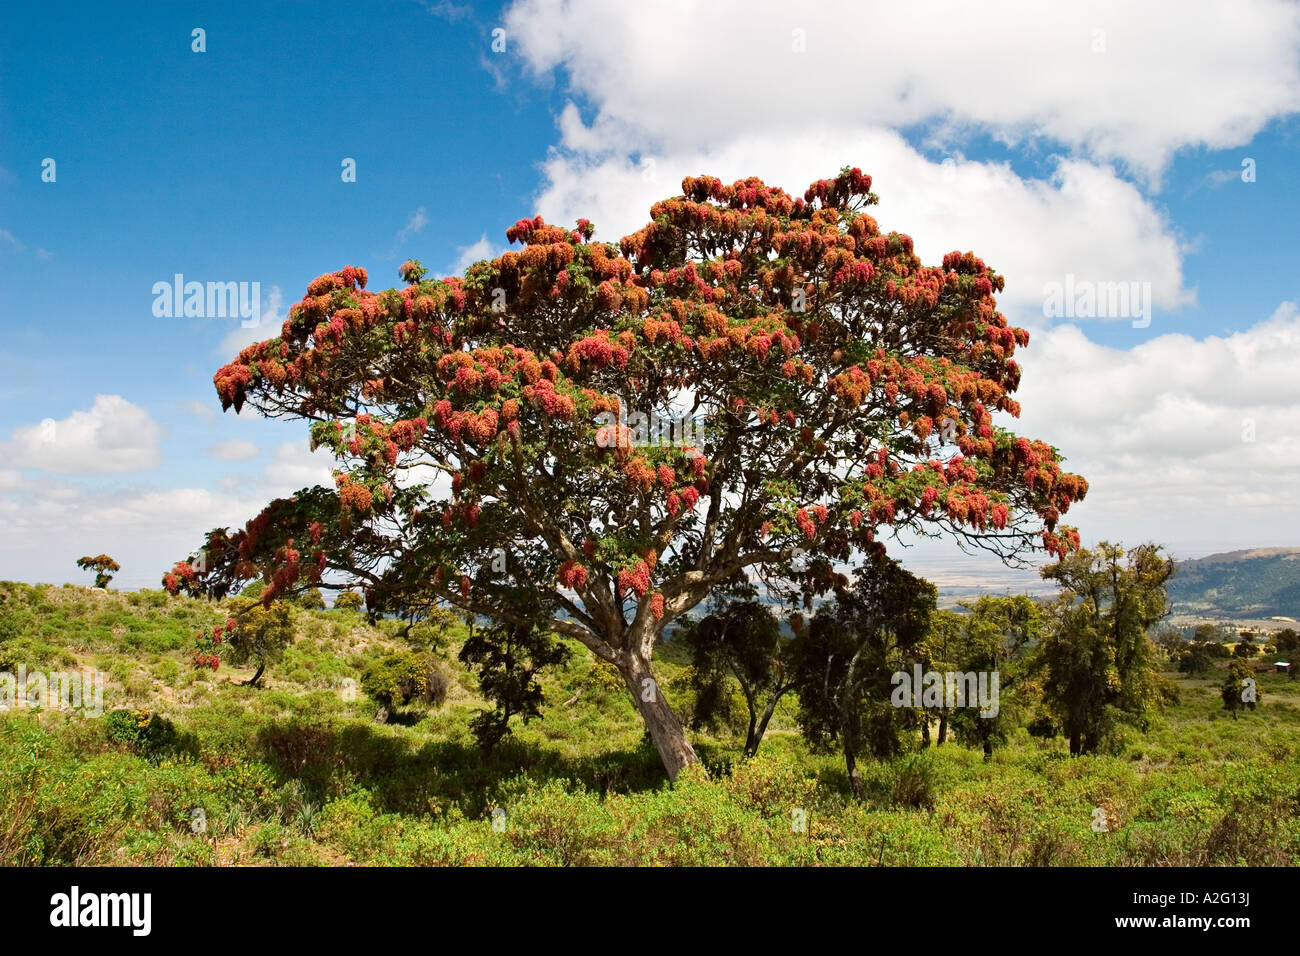 African redwood (Hagenia abyssinica), Bale Mountains National Park, Ethiopia, Africa Stock Photo